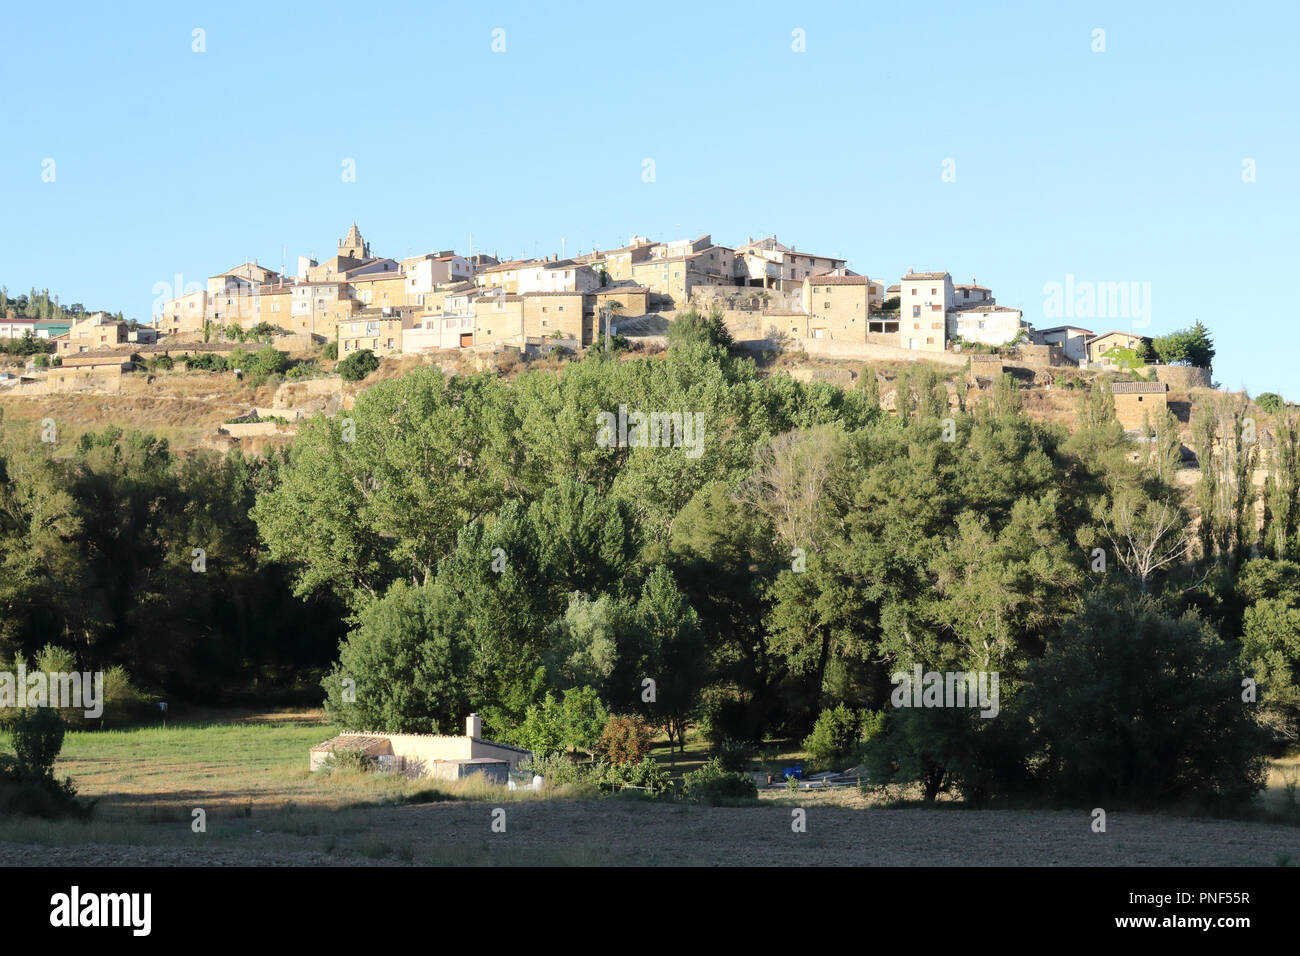 A landscape at sunset of Frago, a traditional Aragonese town over a hill surrounded by cultivated fields, firs and the typical Mediterranean forest Stock Photo